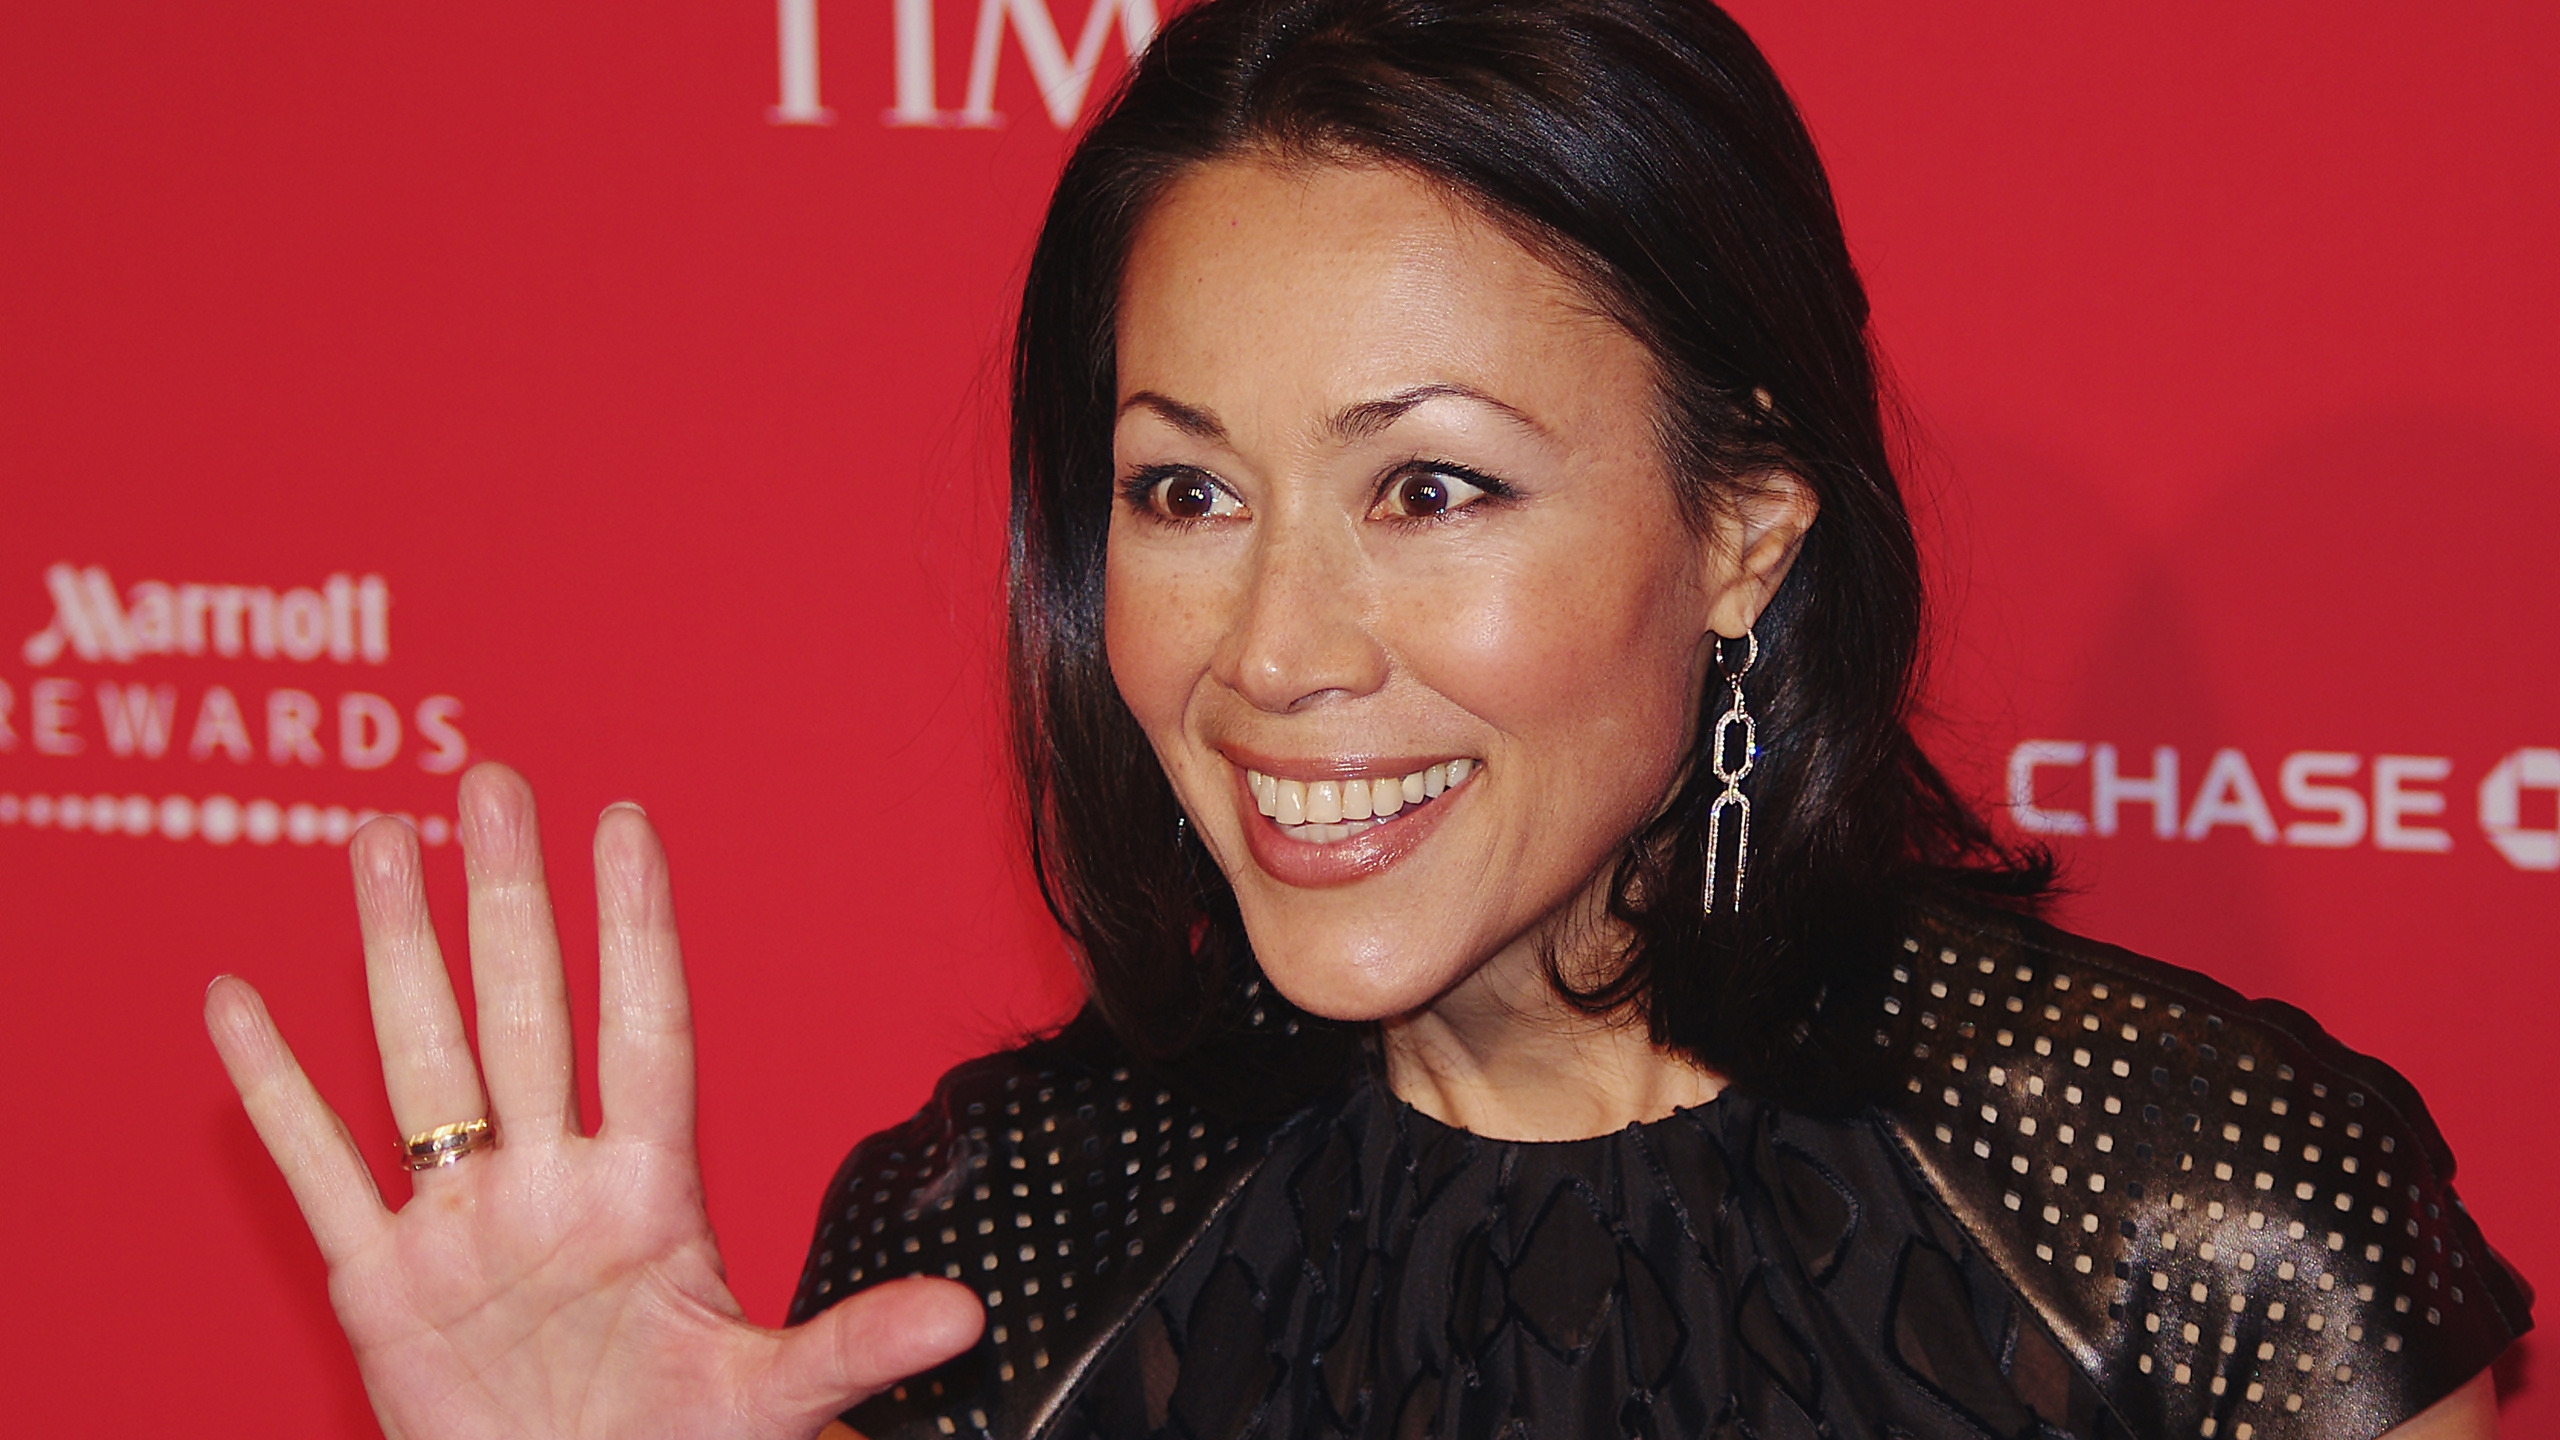 Ann Curry Look for 2560x1440 HDTV resolution